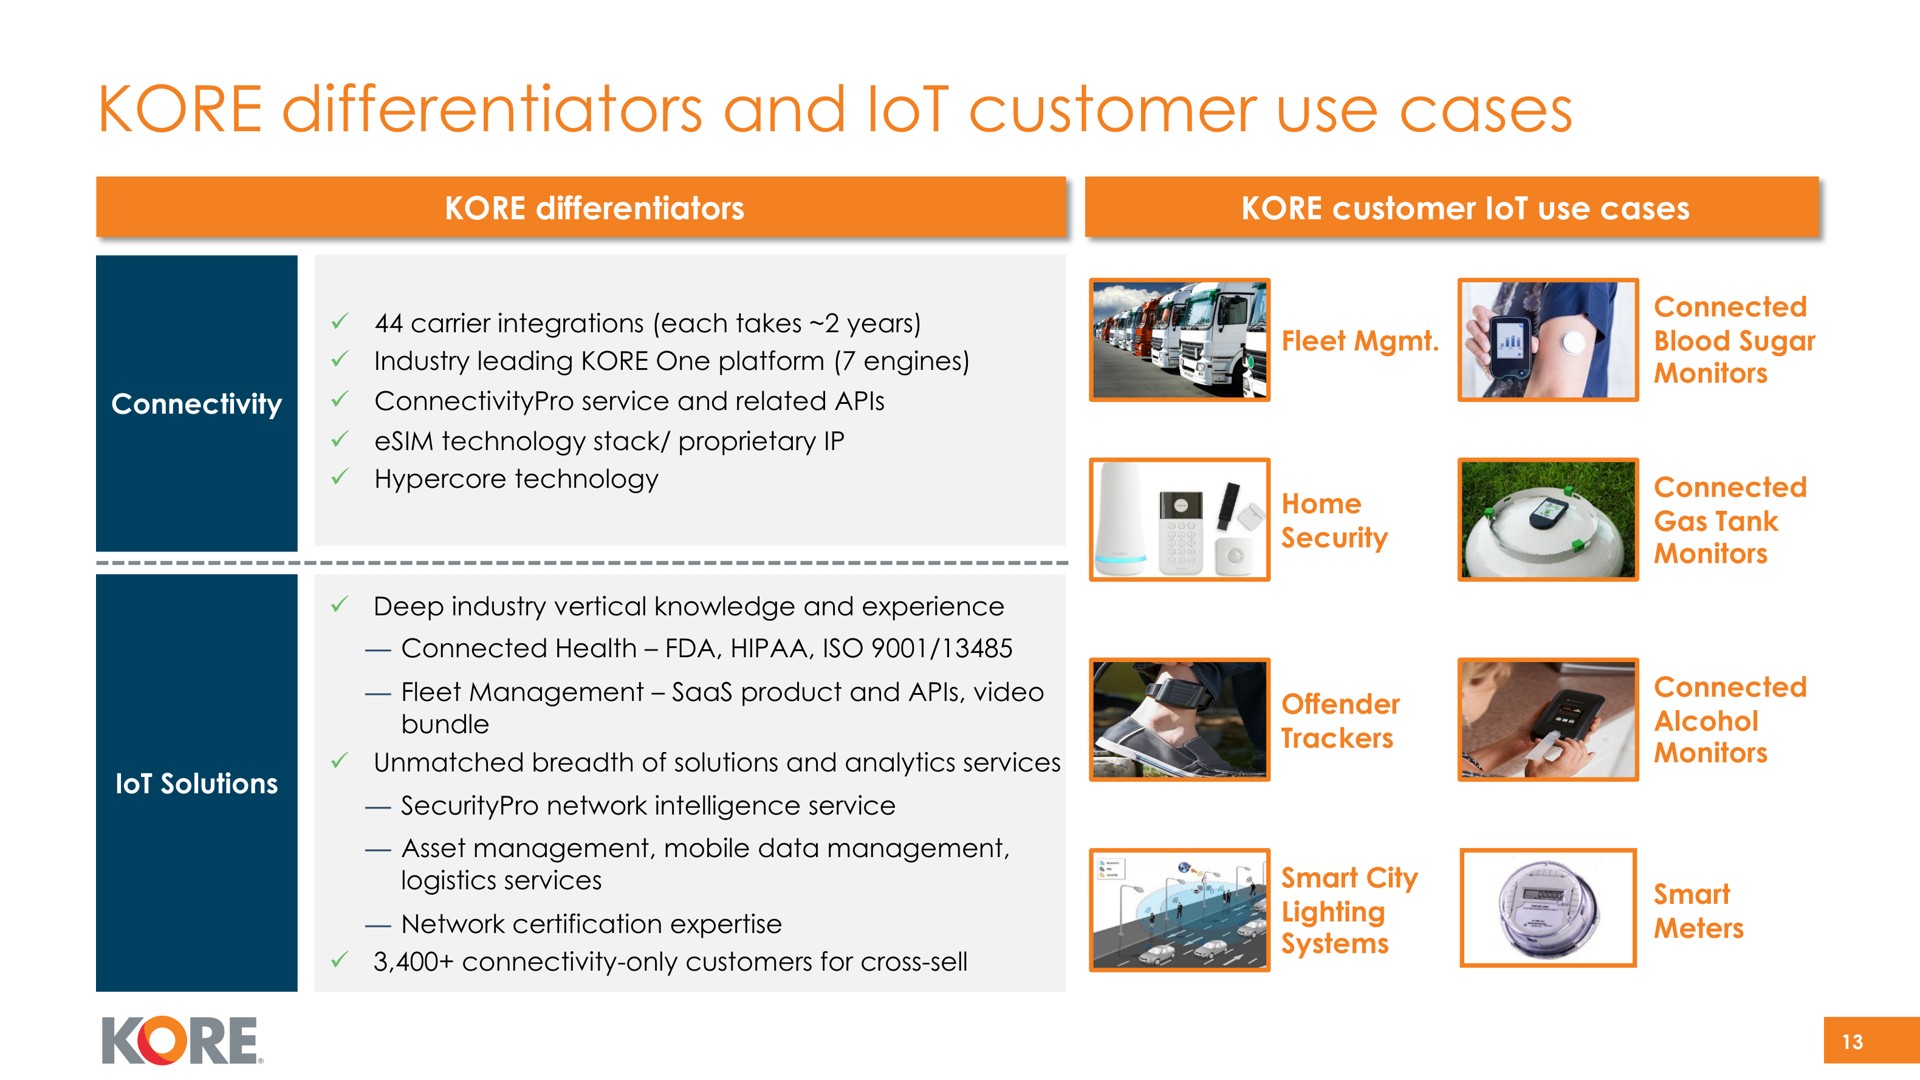 kore differentiators and customer use cases lot | Kore